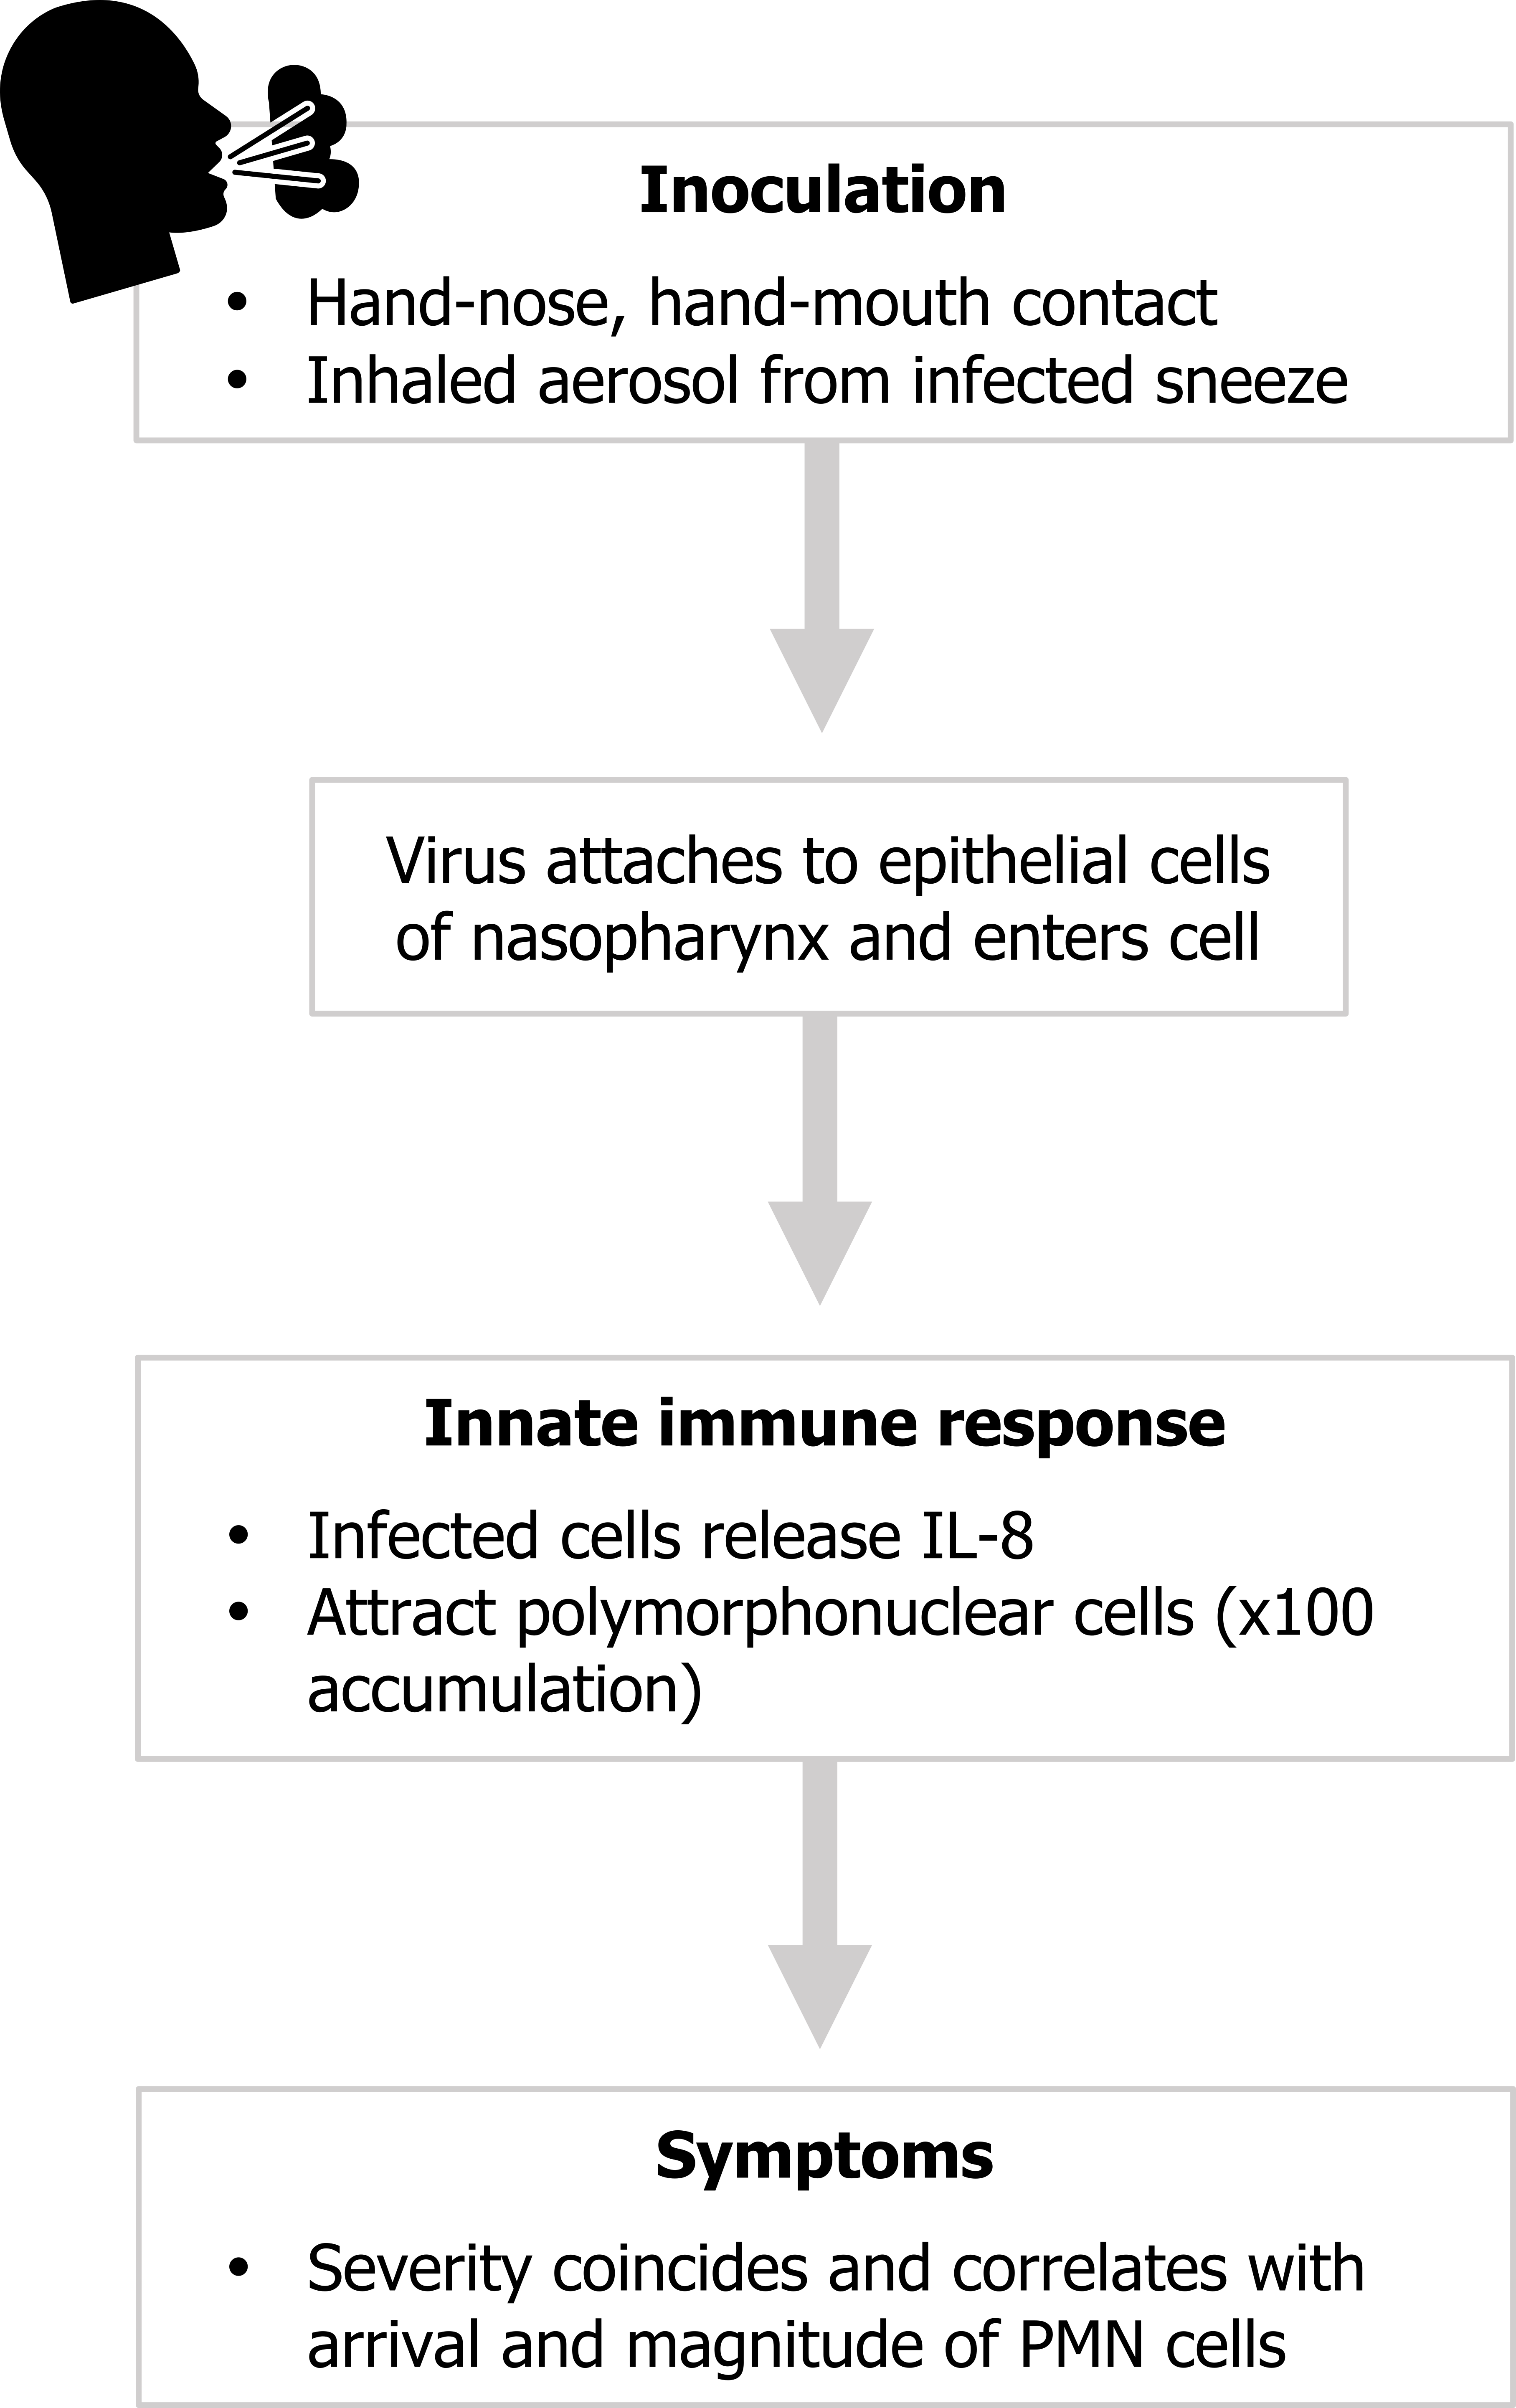 Box titled inoculation with bullet points hand-nose, hand-mouth contact, inhaled aerosol from infected sneeze arrow from box to virus attaches to epithelial cells of nasopharynx and enters cell arrow to box titled innate immune response with bullets infected cells release IL-8, attract polymorphonuclear cells (x100 accumulation) arrow from box to box titled symptoms with bullet severity coincides and correlates with arrival and magnitude of PMN cells.